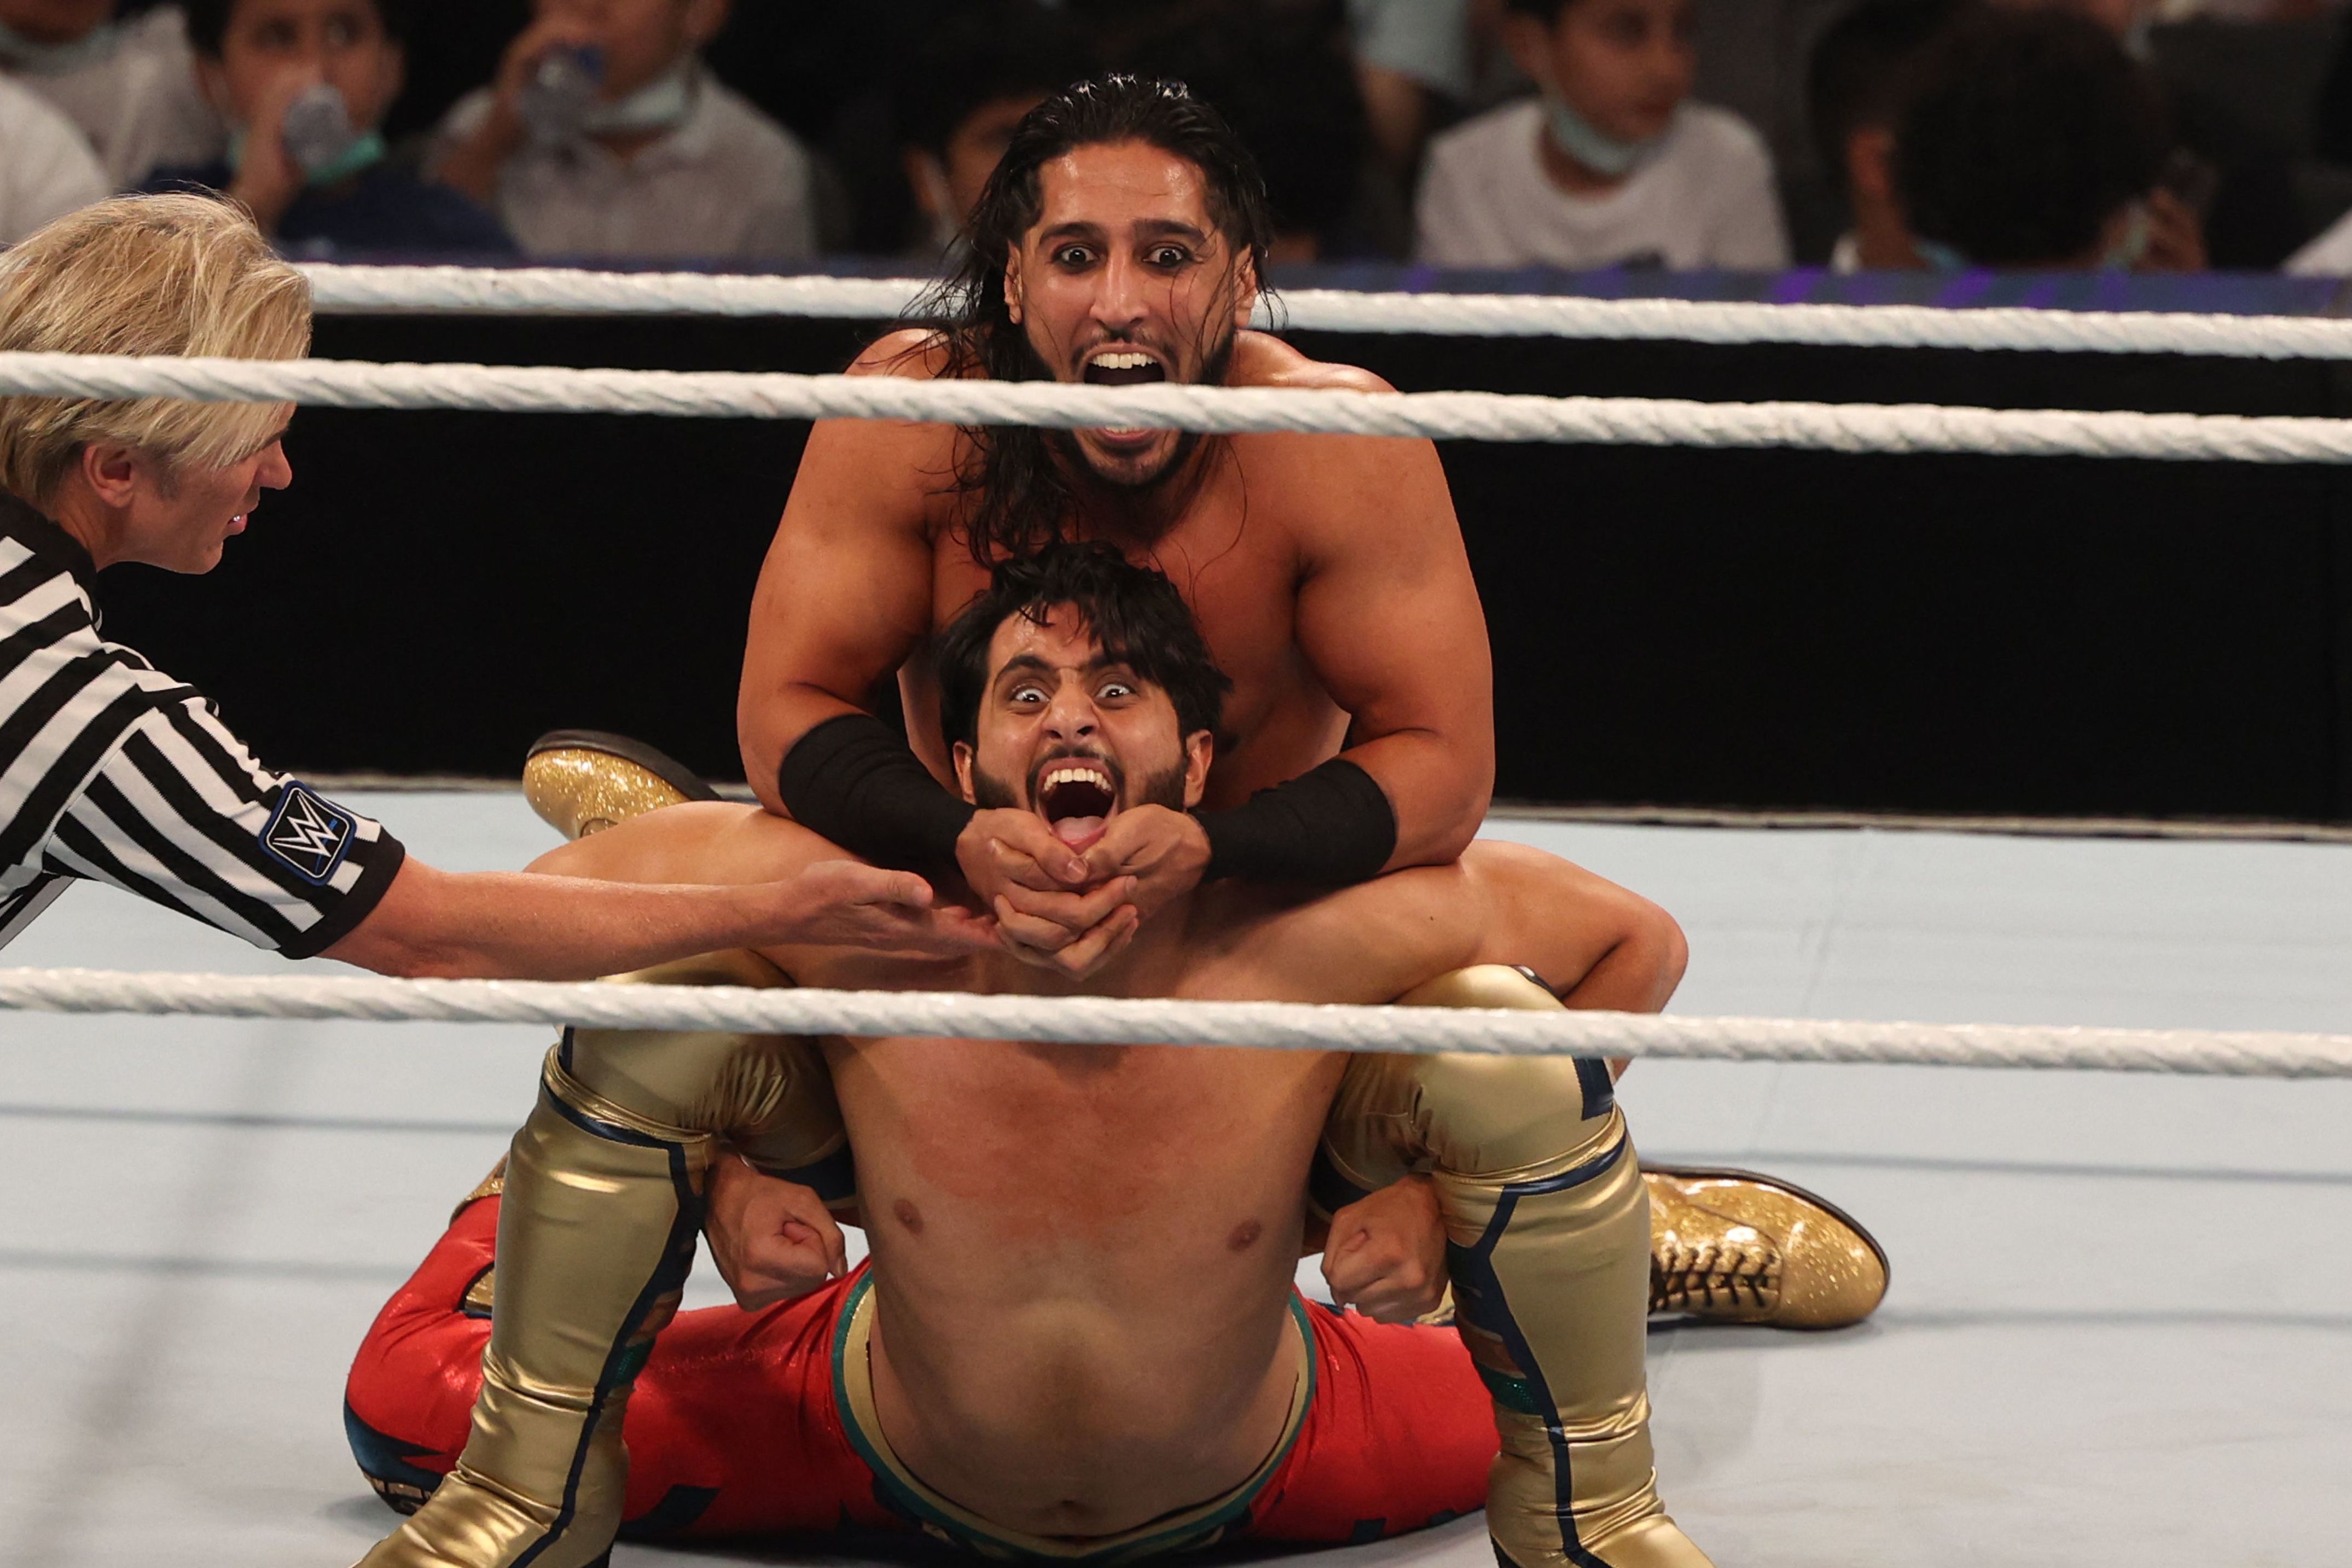 According to Fightful, Mustafa Ali's request to be released from the WWE contract is not being granted thumbnail